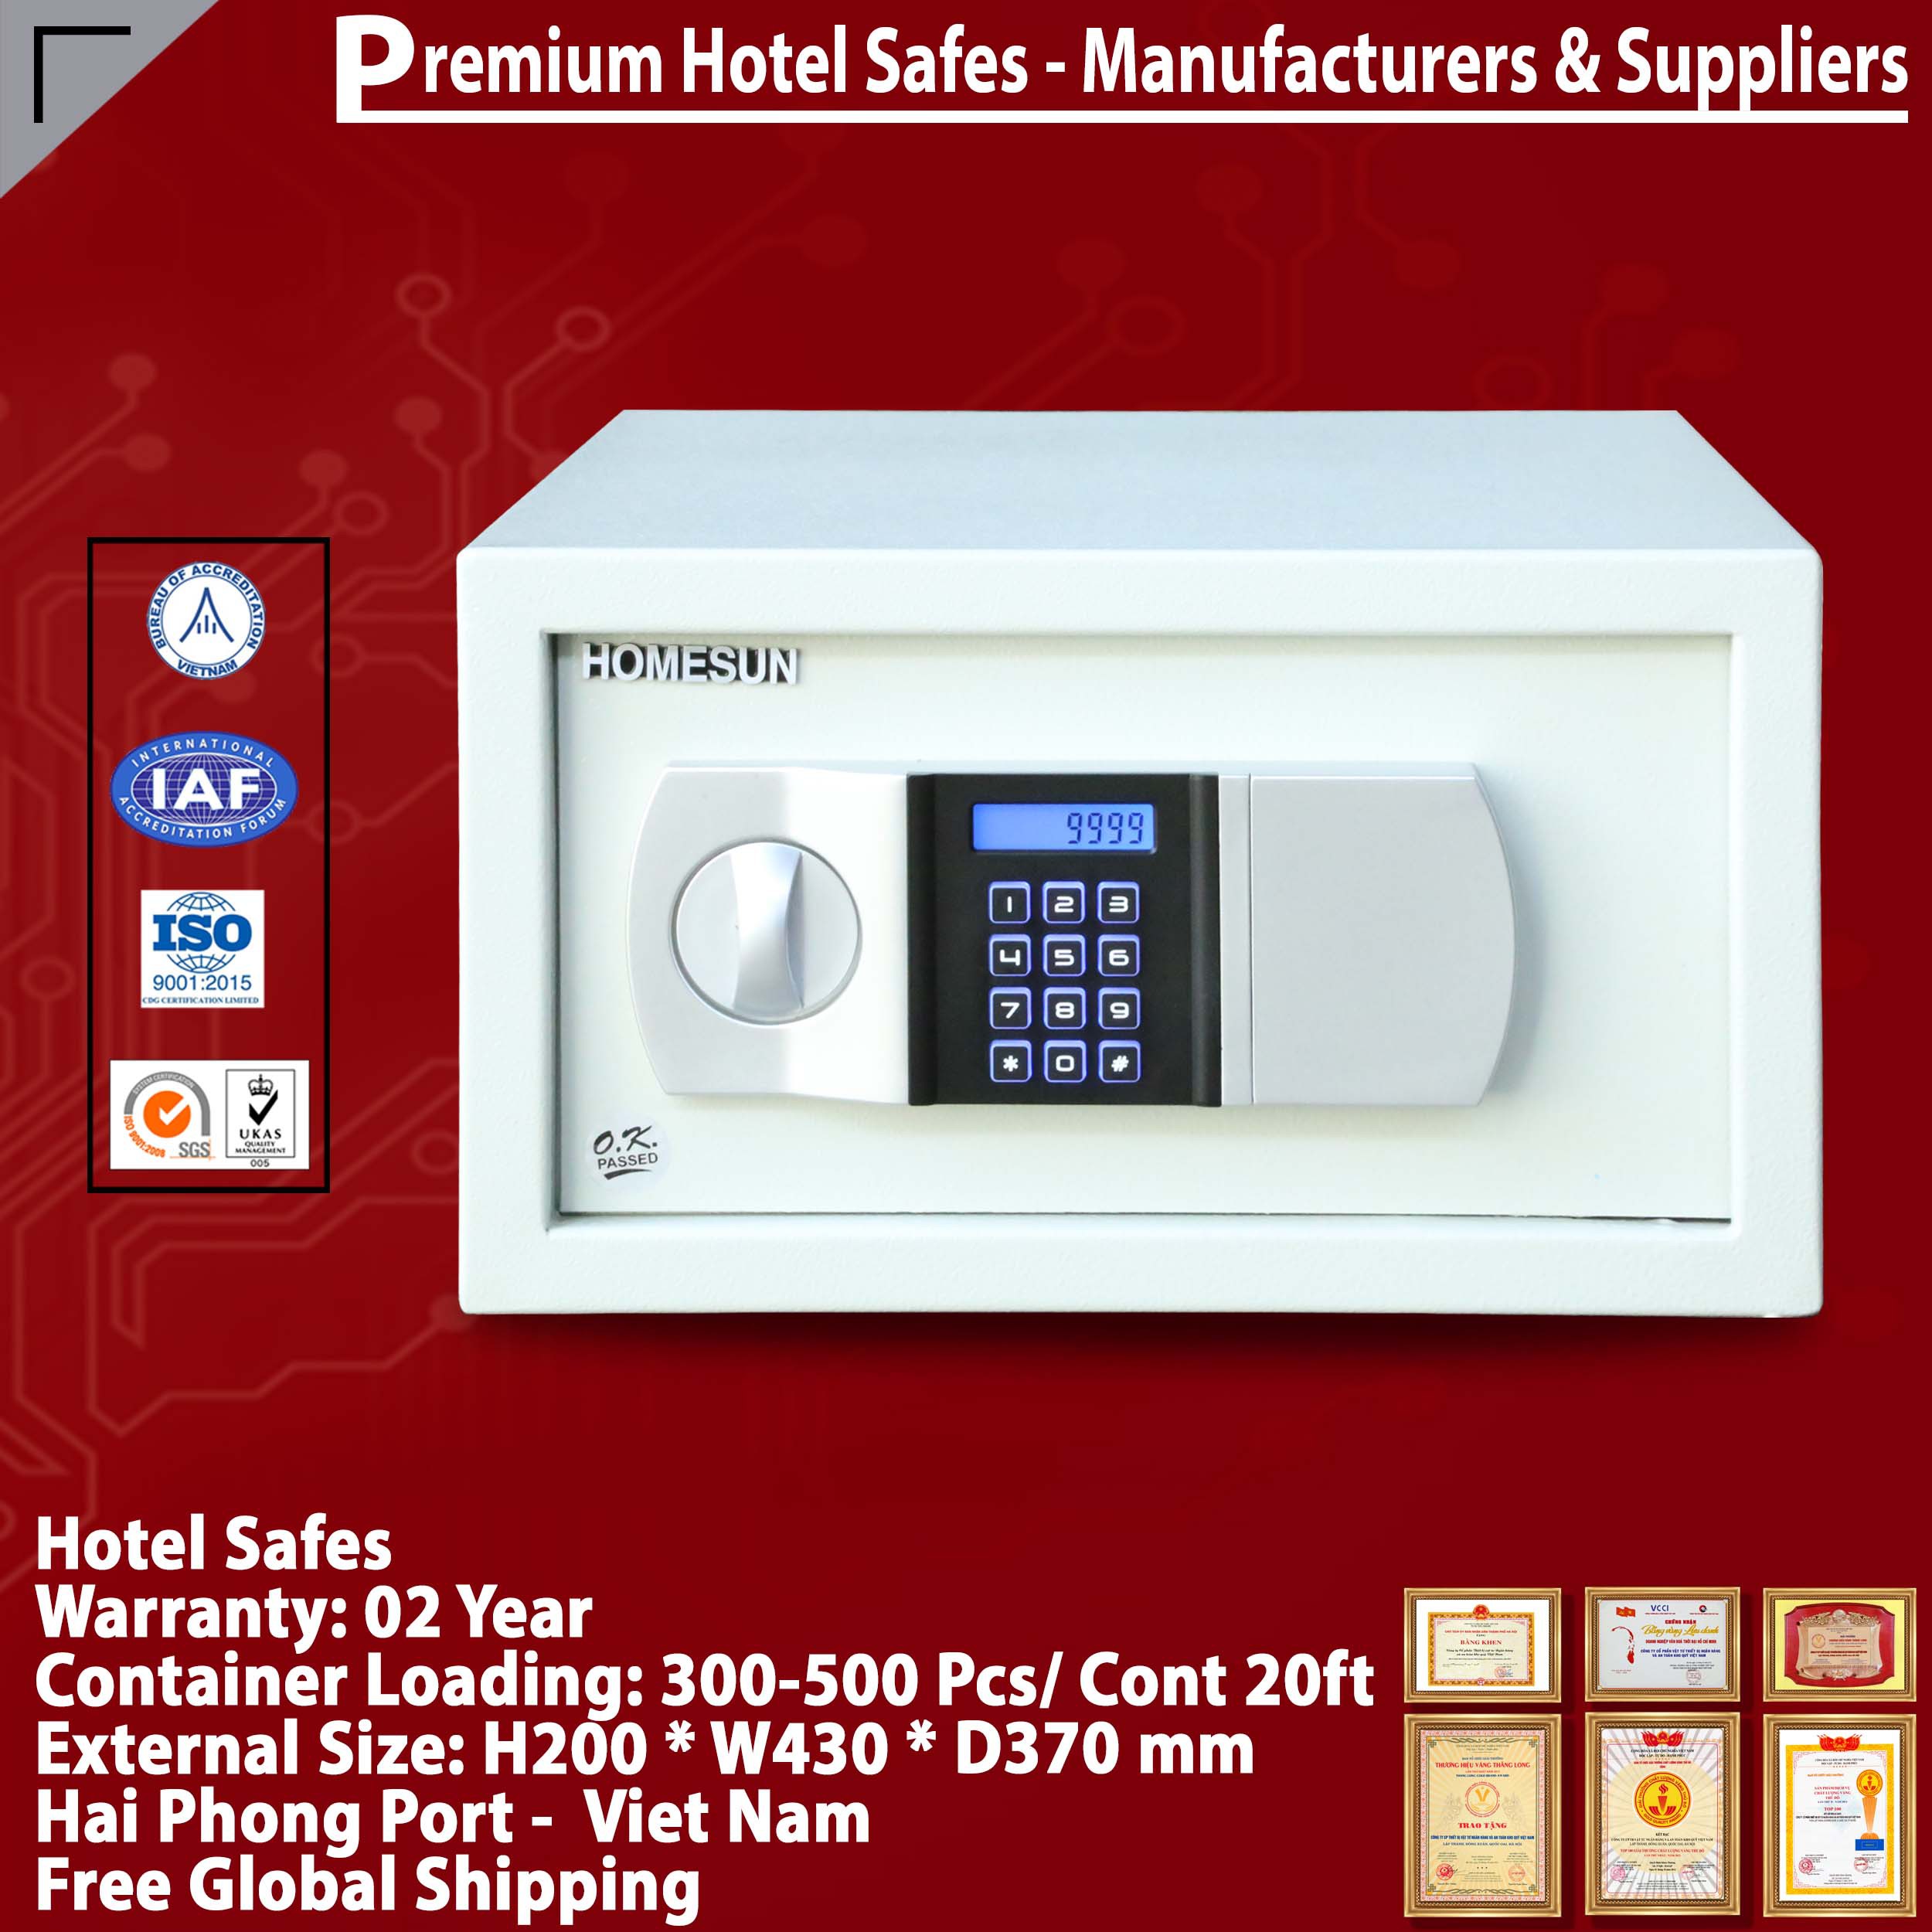 Buy Hotel Safe, Safes For Hotels From Ireland's